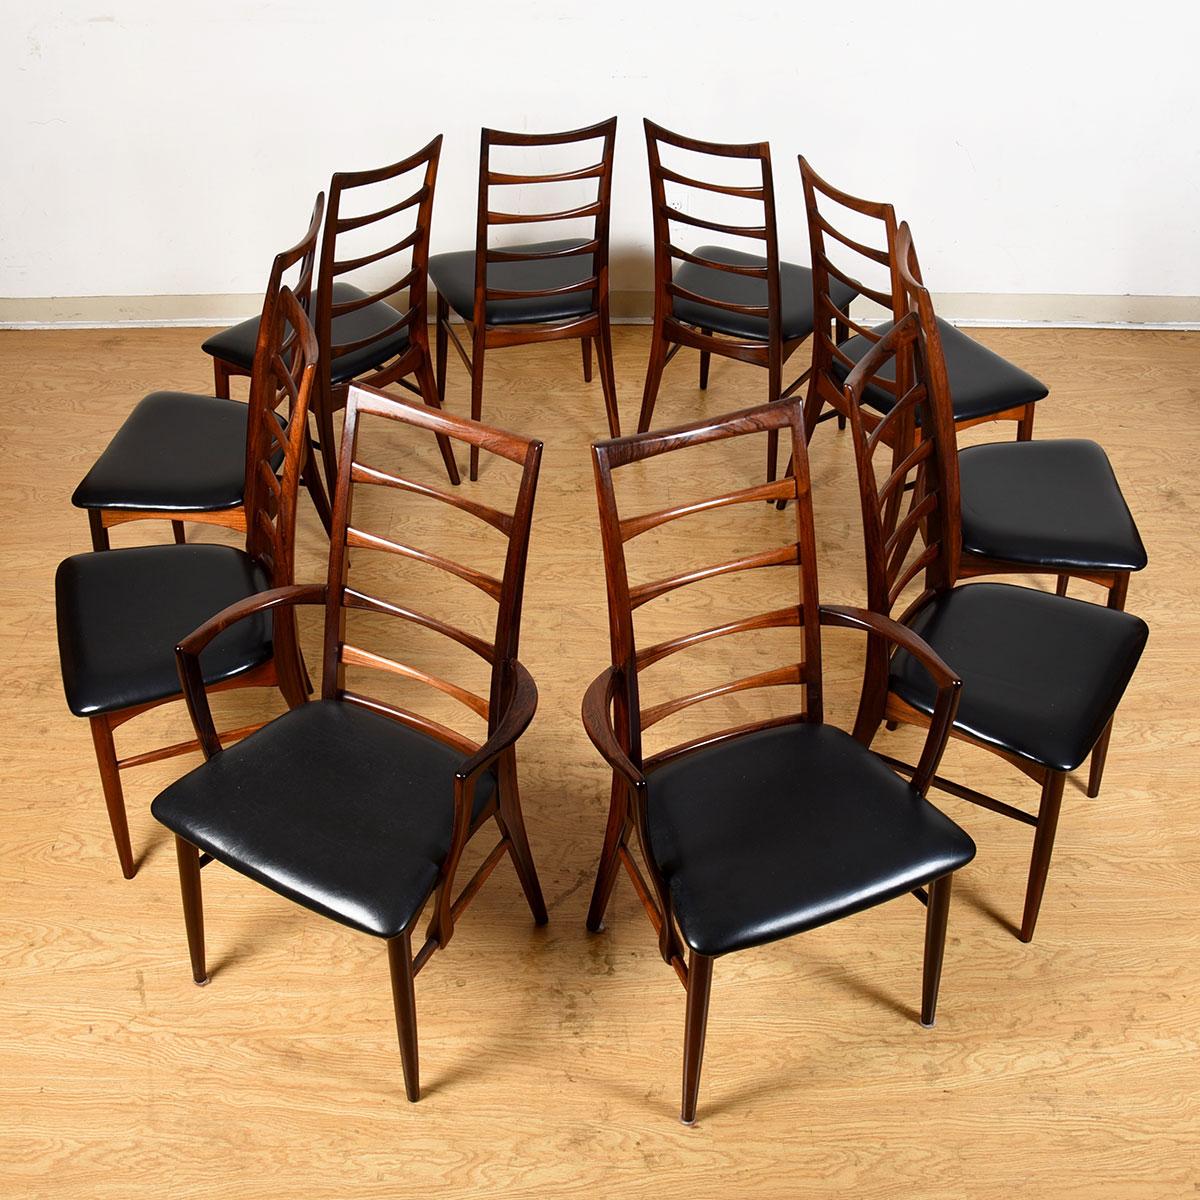 Beautifully proportioned and refined set of rosewood ladder back chairs from Koefoeds Hornslet. Two arm chairs and eight side chairs. Chairs don’t get much sexier than these stylish, comfortable and slender chairs.



*Due to time, labor costs, and